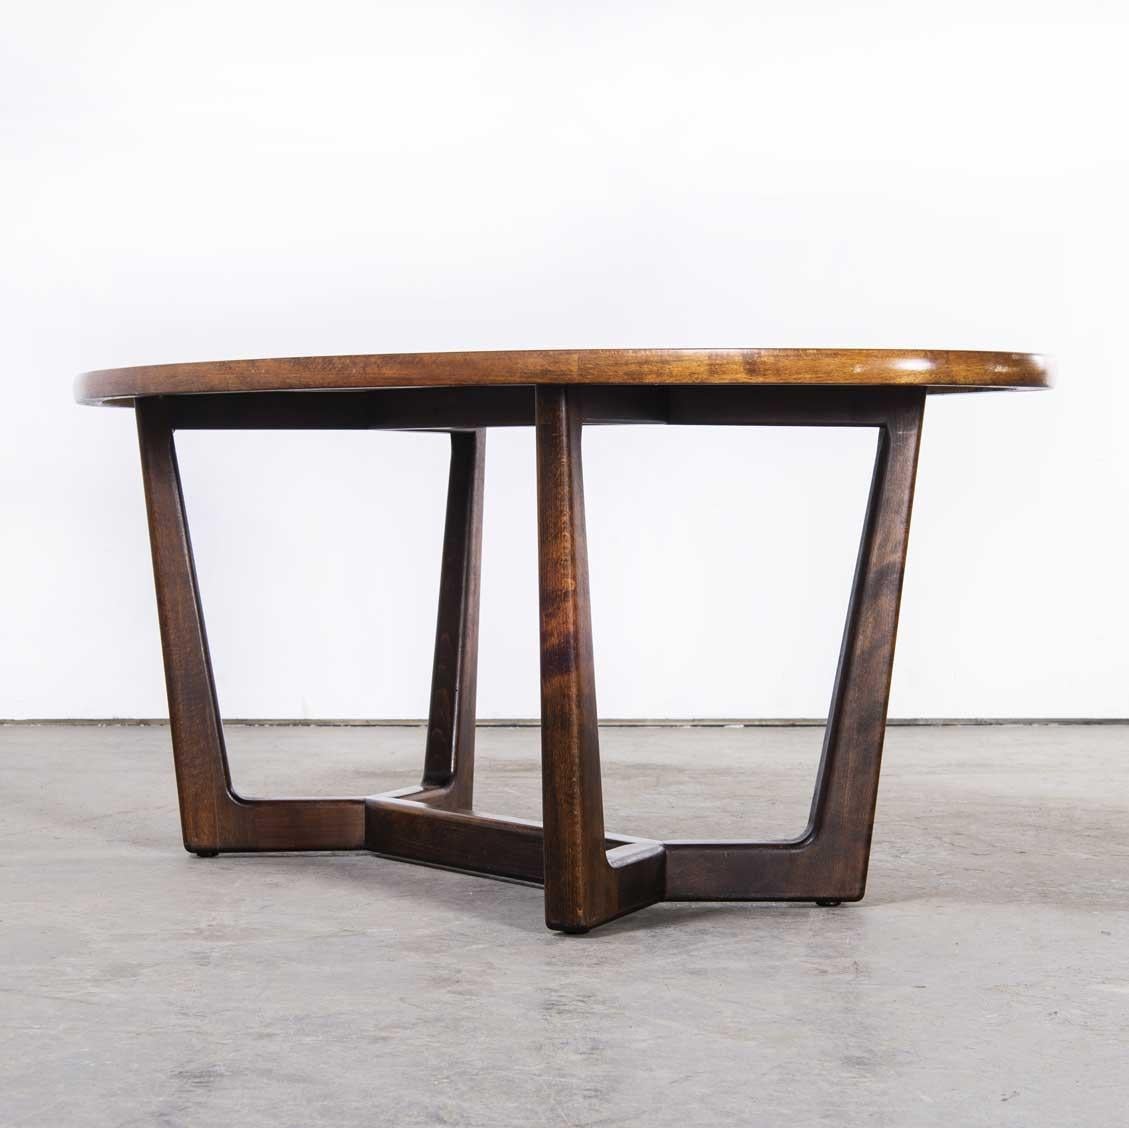 1970’s Czech low oval occasional table By Drevotvar
1970’s Czech low oval occasional table By Drevotvar. Produced by Drevotvar in Jablonne and Orlici in the Czech Republic. Czech design will always be affiliated to the Bauhaus movement which